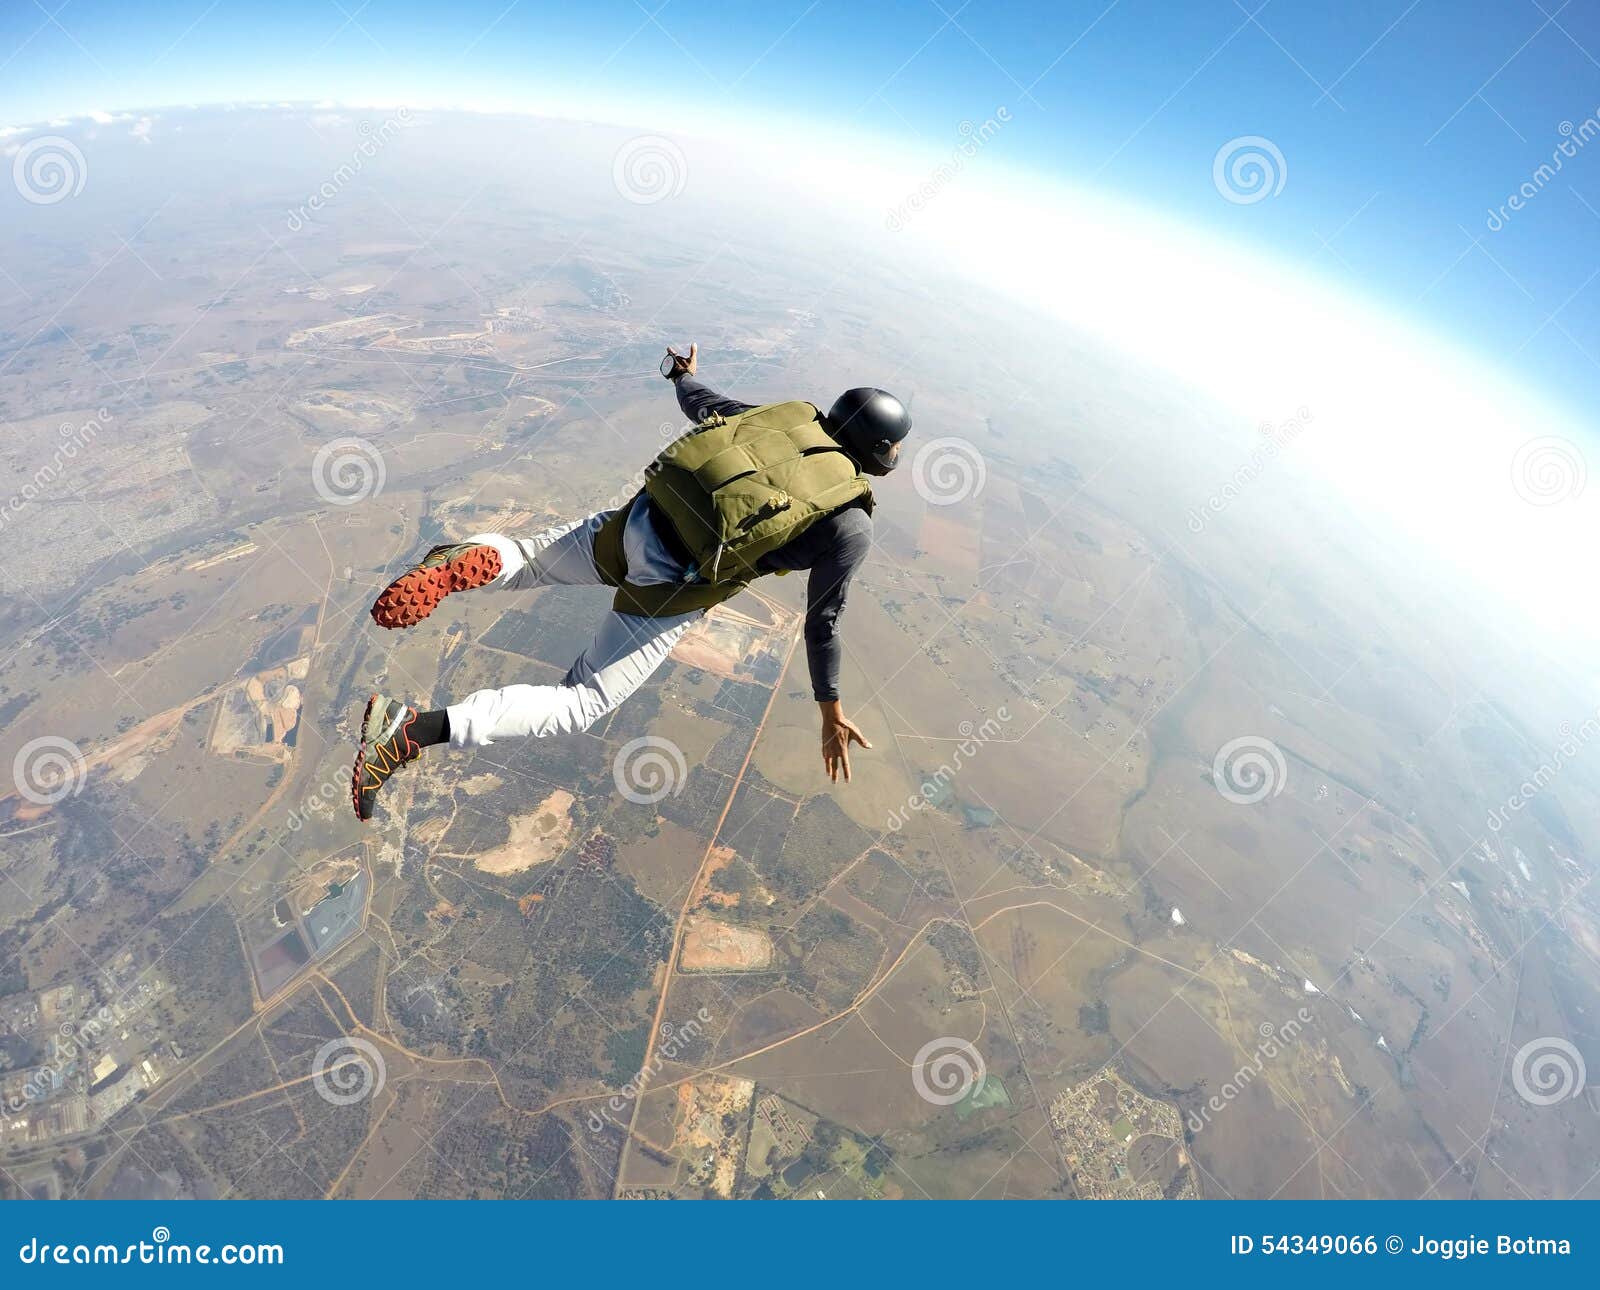 skydiver in action